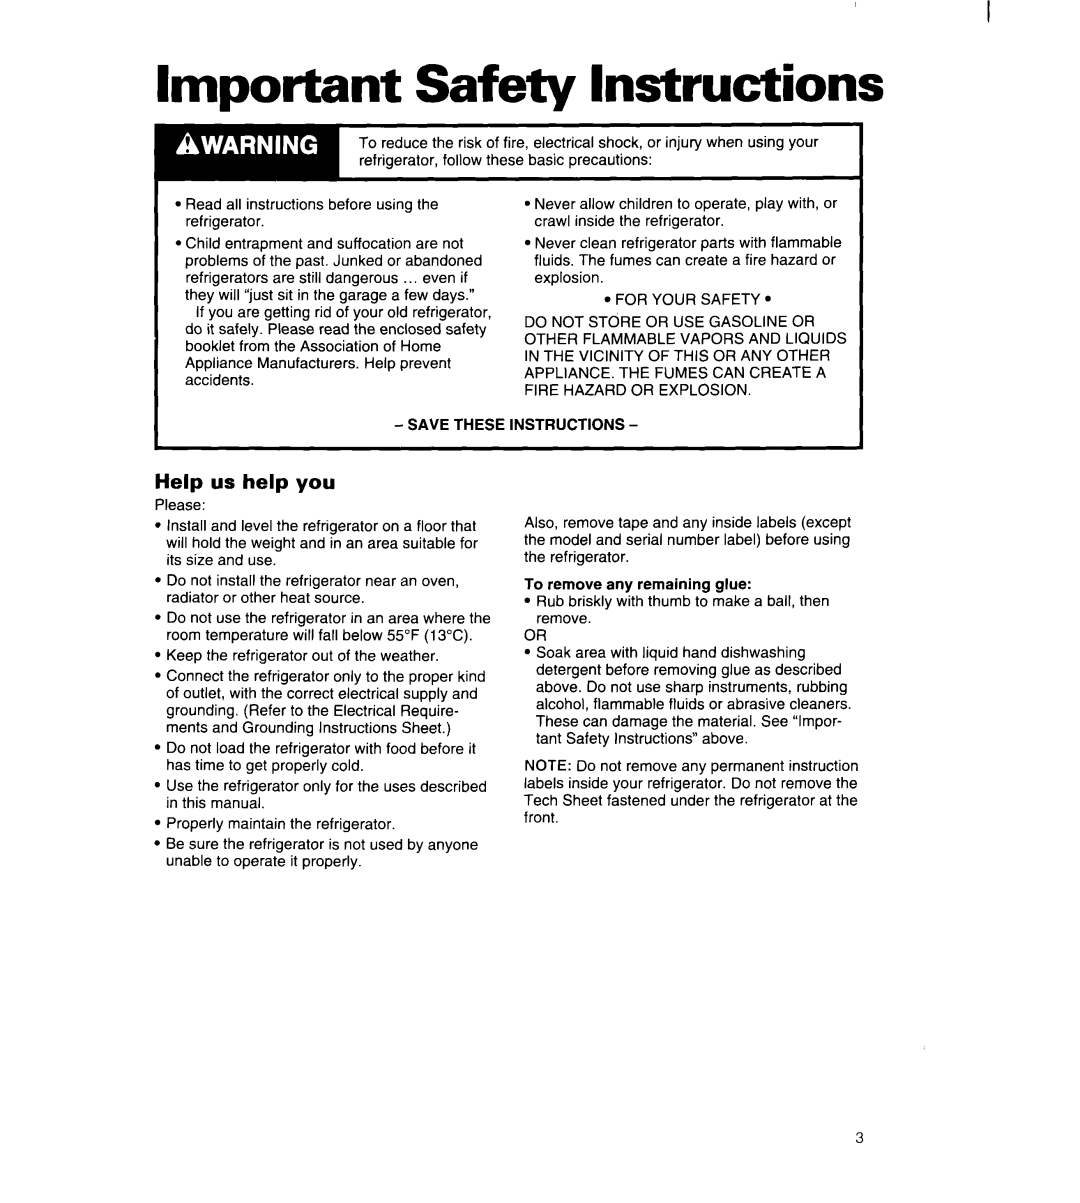 Whirlpool 8ED22PW manual ImDortant Safetv Instructions, Help us help you 